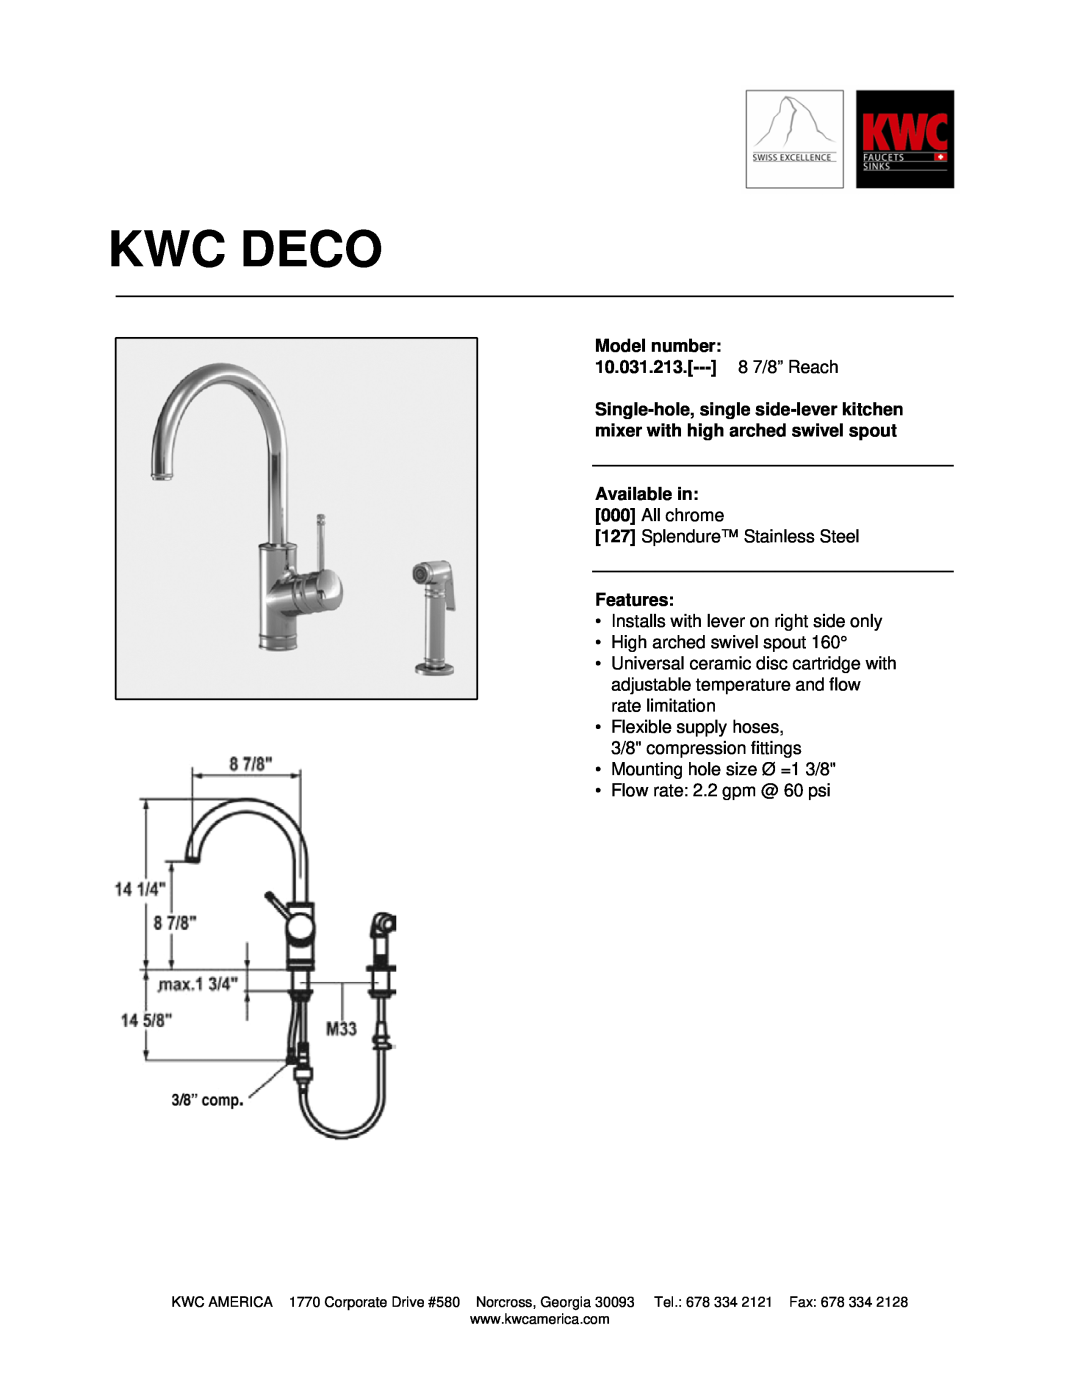 KWC manual Kwc Deco, Model number 10.031.213.--- 8 7/8” Reach, Available in, Features 